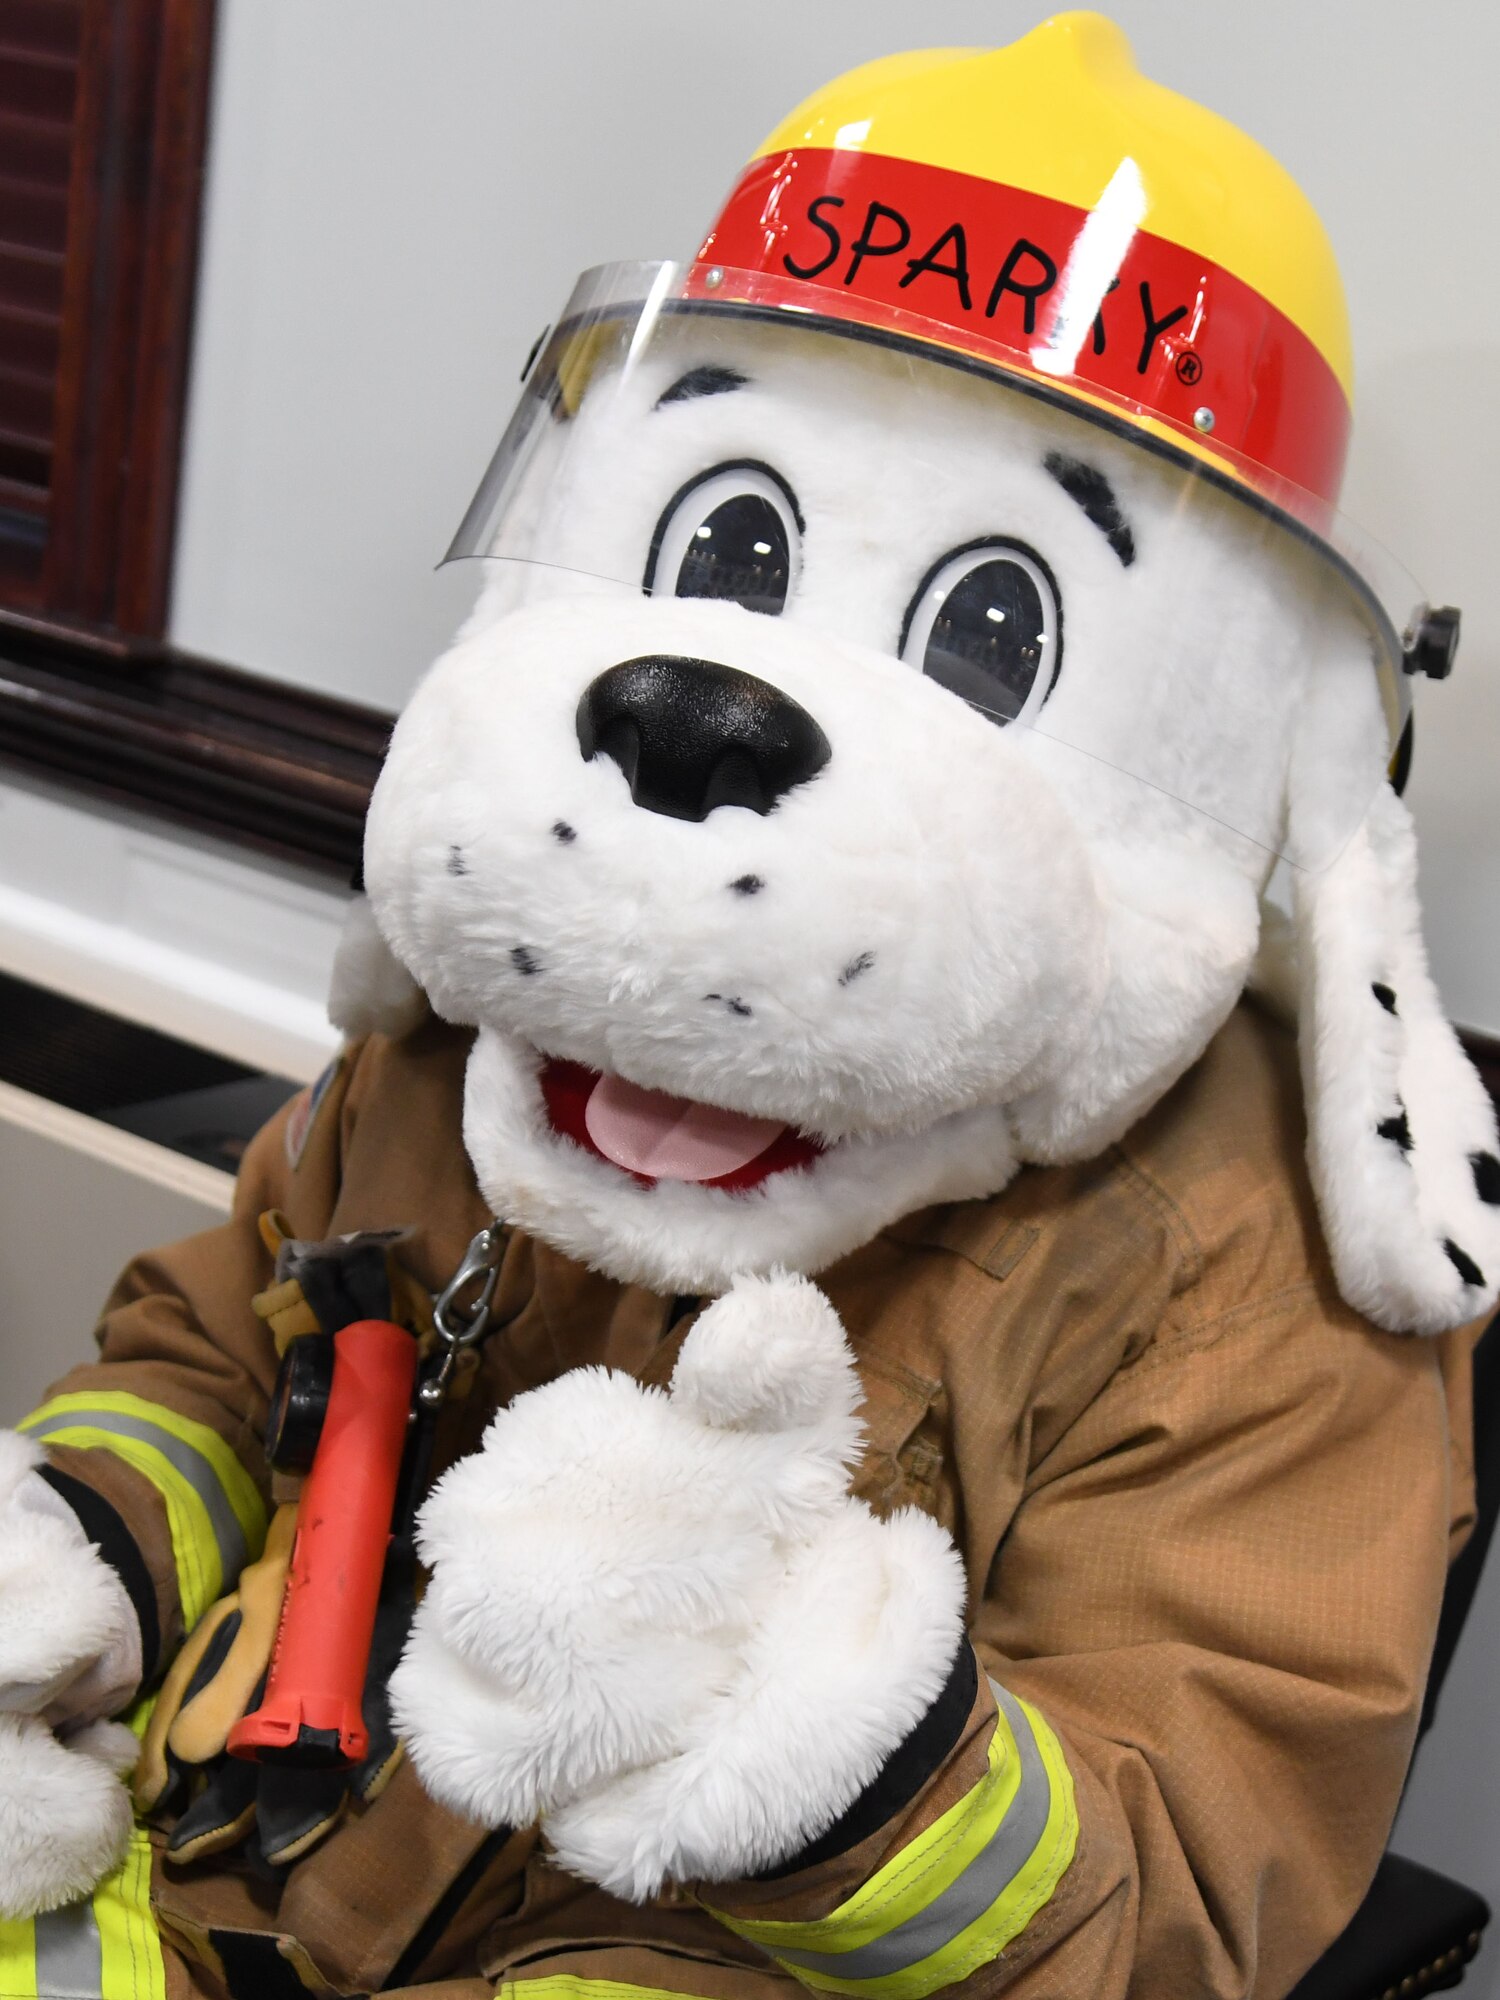 Sparky poses for a photo during the Fire Prevention Week proclamation signing inside the 81st TRW headquarters building at Keesler Air Force Base, Mississippi, Oct. 4, 2022. The week-long event, Oct. 9-15, includes fire drills, literature hand-outs and visits from Sparky around the base. (U.S. Air Force photo by Kemberly Groue)